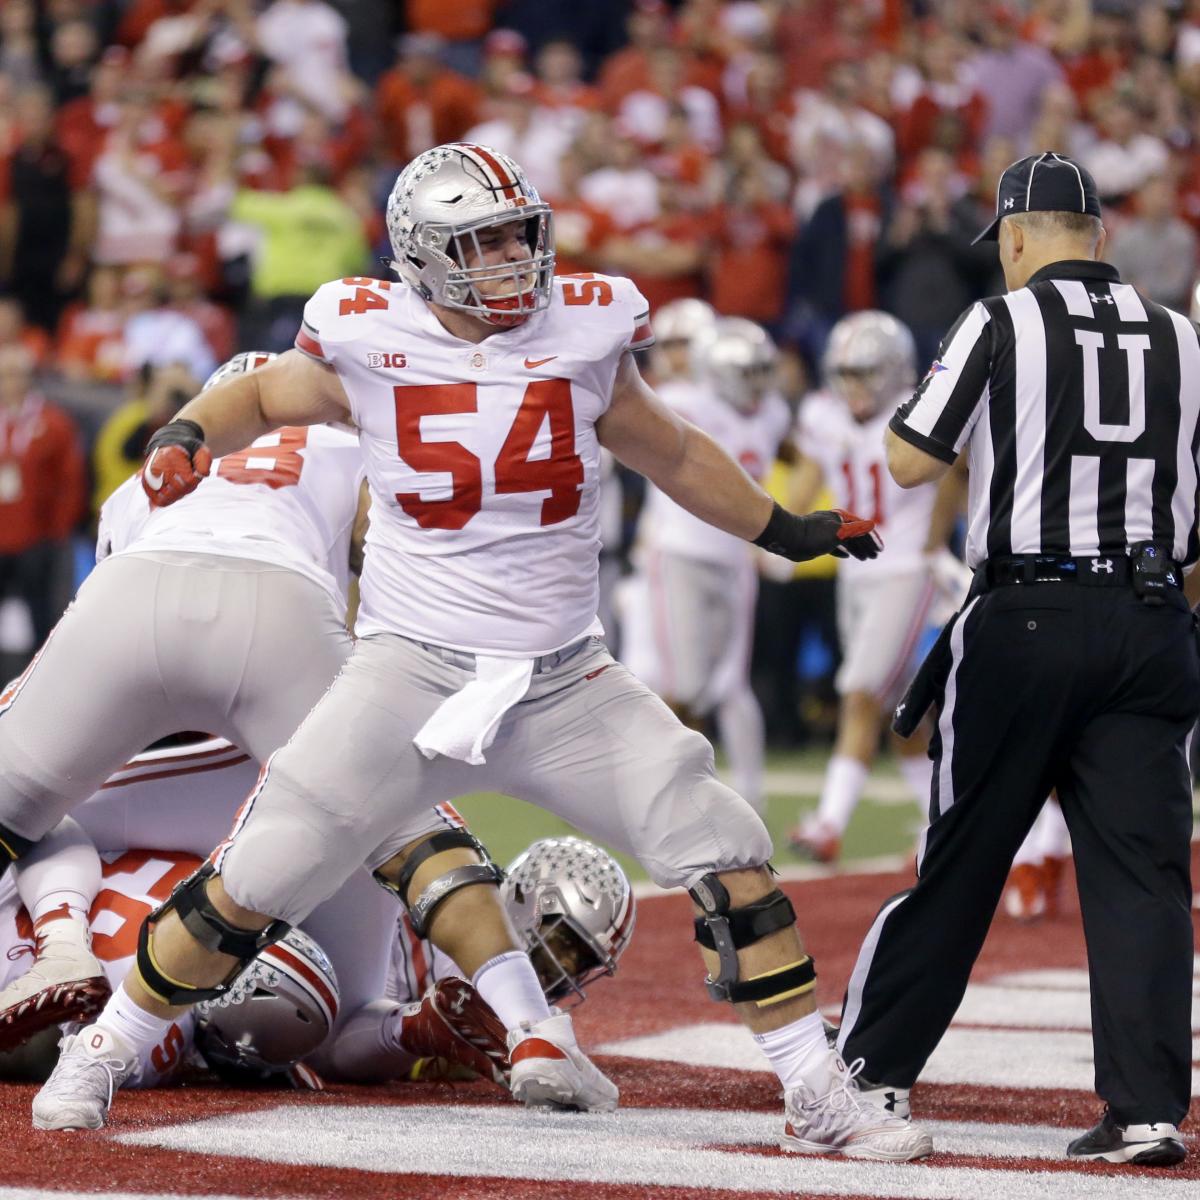 NFL Draft Prospect Billy Price Expected to Miss 4 Months After Torn Pec